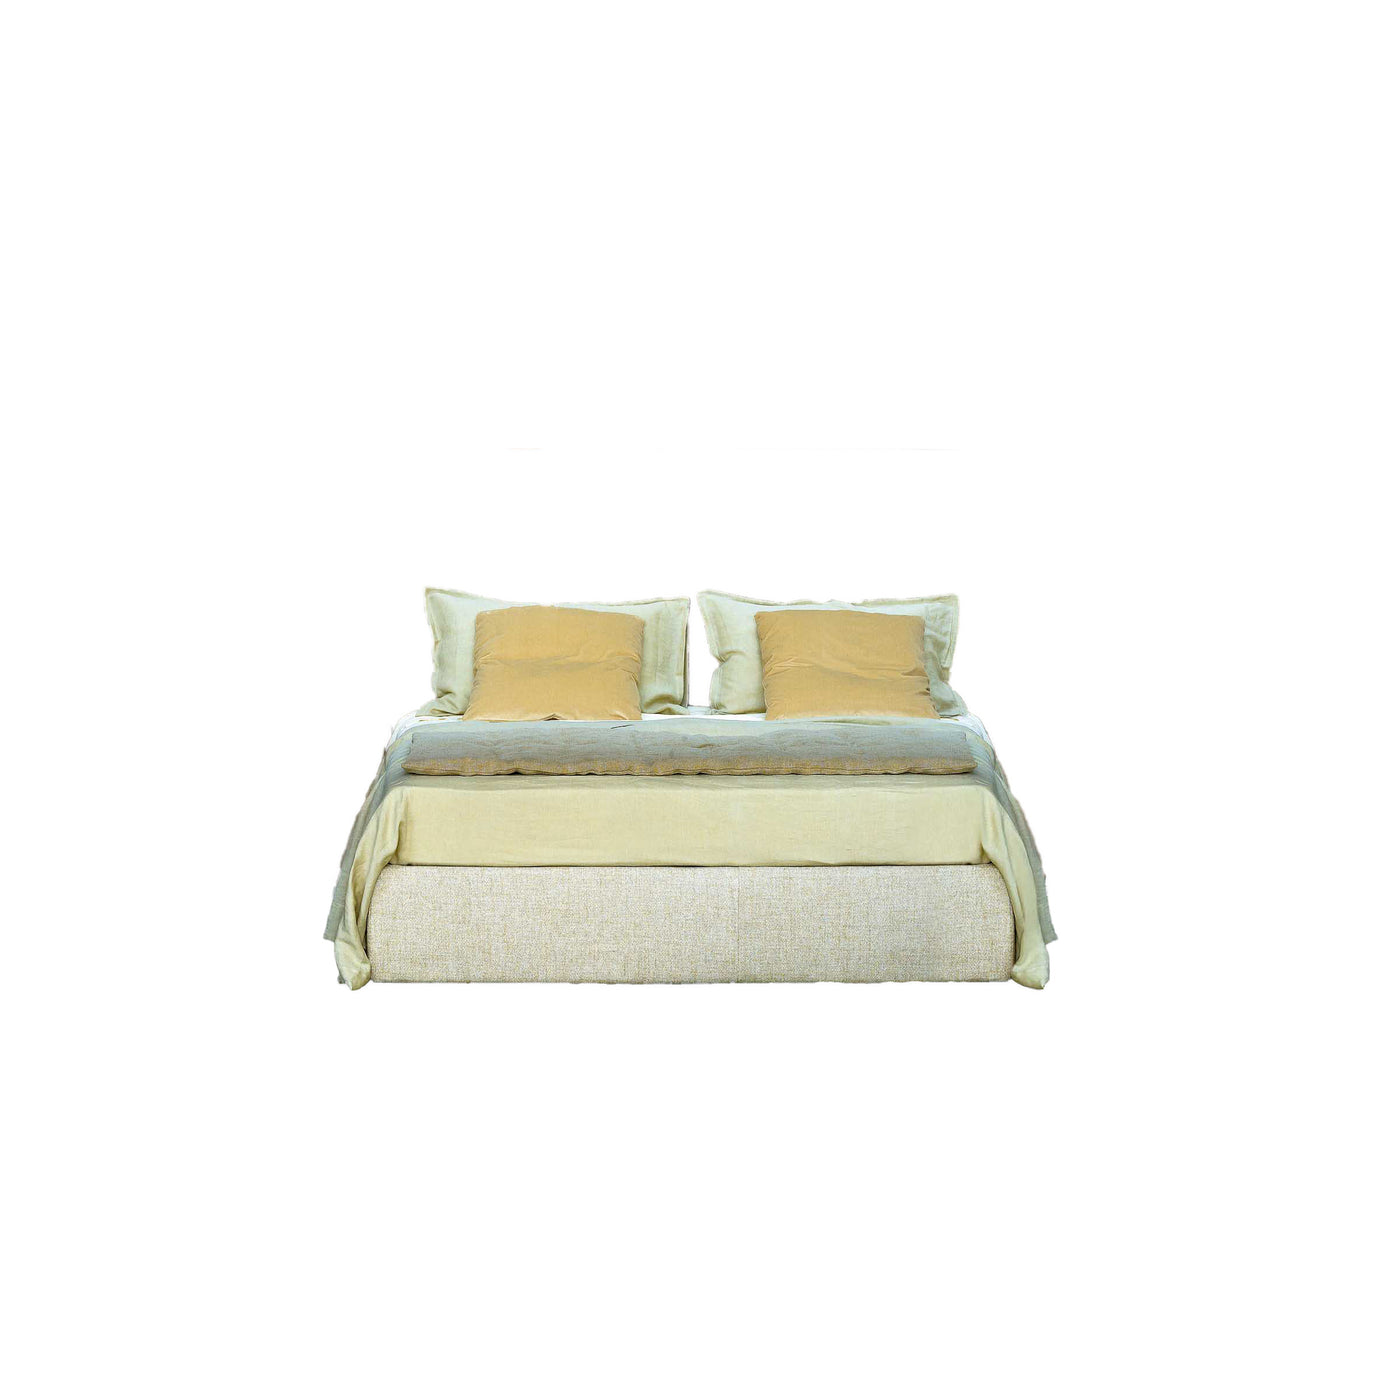 Bed PALAZZO by Bernhardt&Valle for Arflex 04